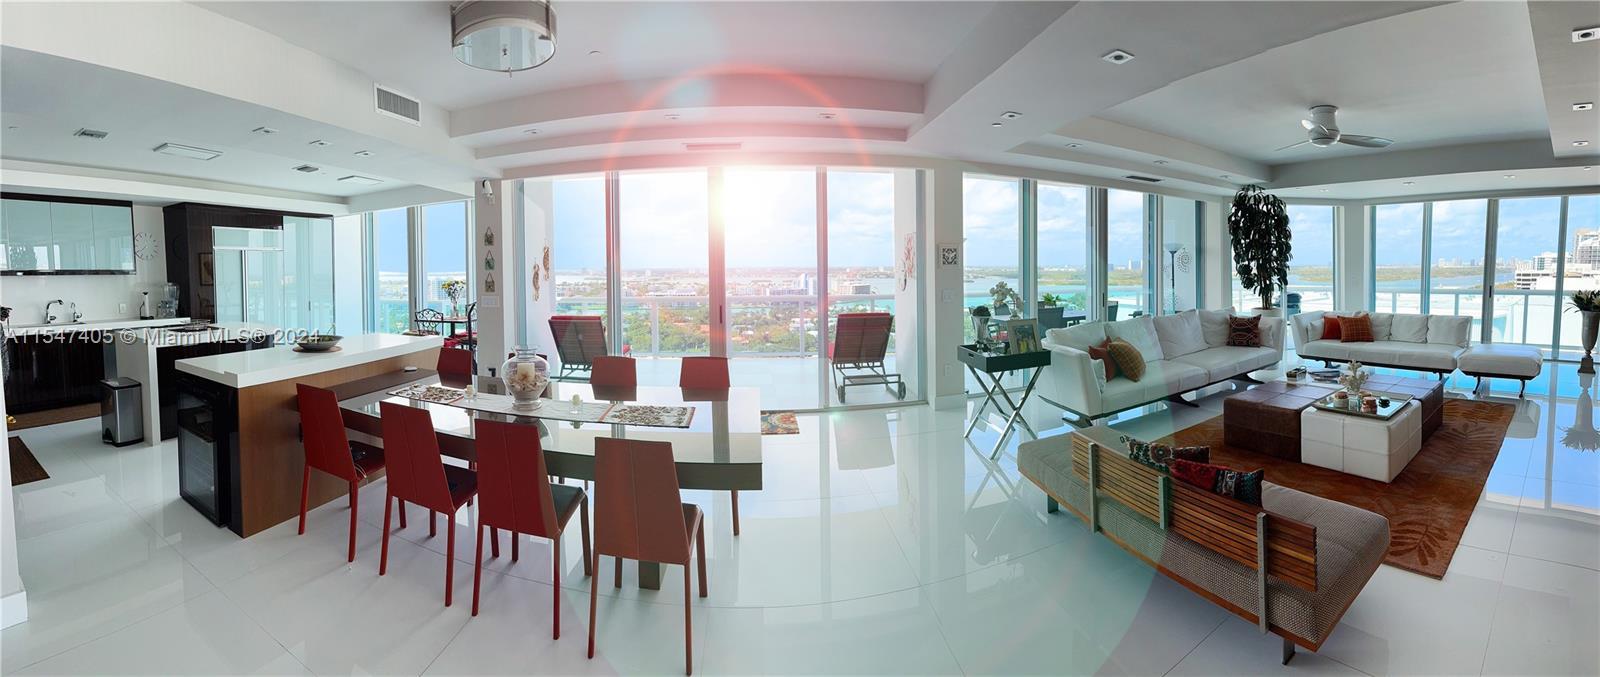 The wrap-around balcony allows a spectacular view of the Ocean, the Bay, and the City with incredibl